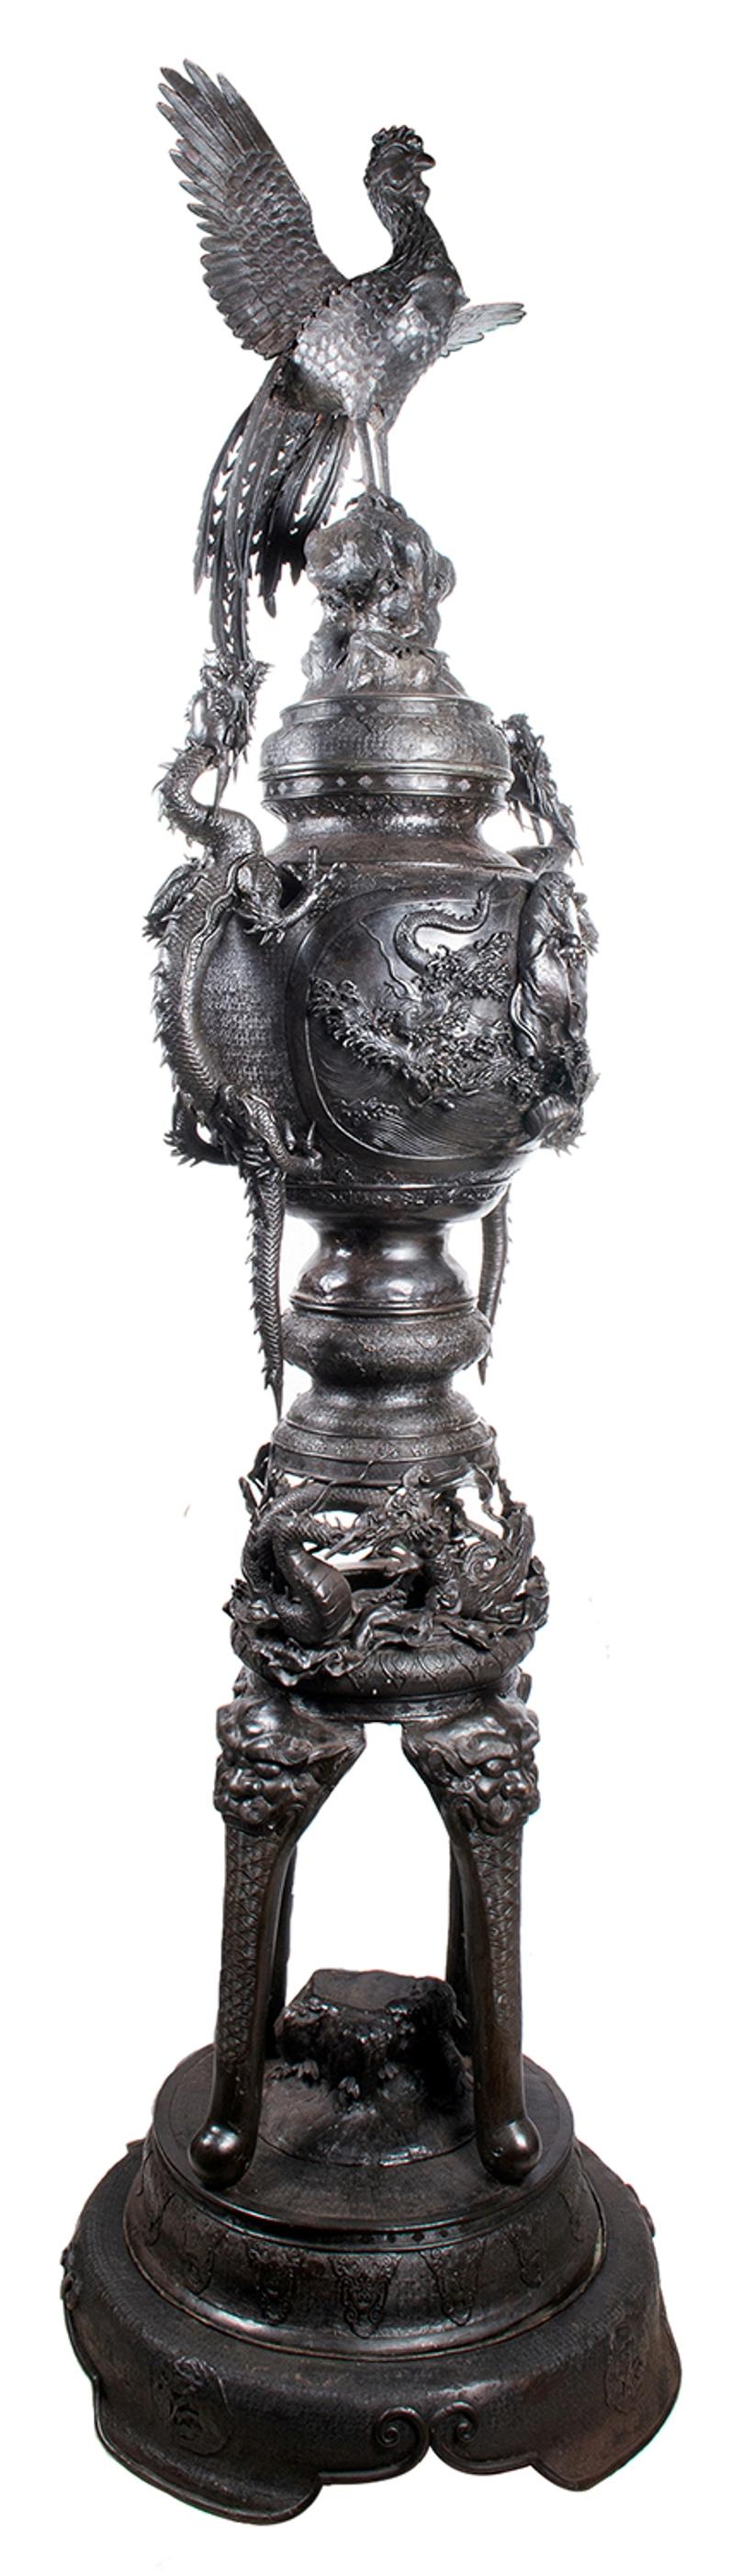 A very large and impressive good quality Japanese Meiji period (1868-1912) patinated bronze Koro. Having wonderful mythical dragon handles, a Peacock finial, an Eagle in a tree top and a Sea God under the waves. Above entwined dragons and four